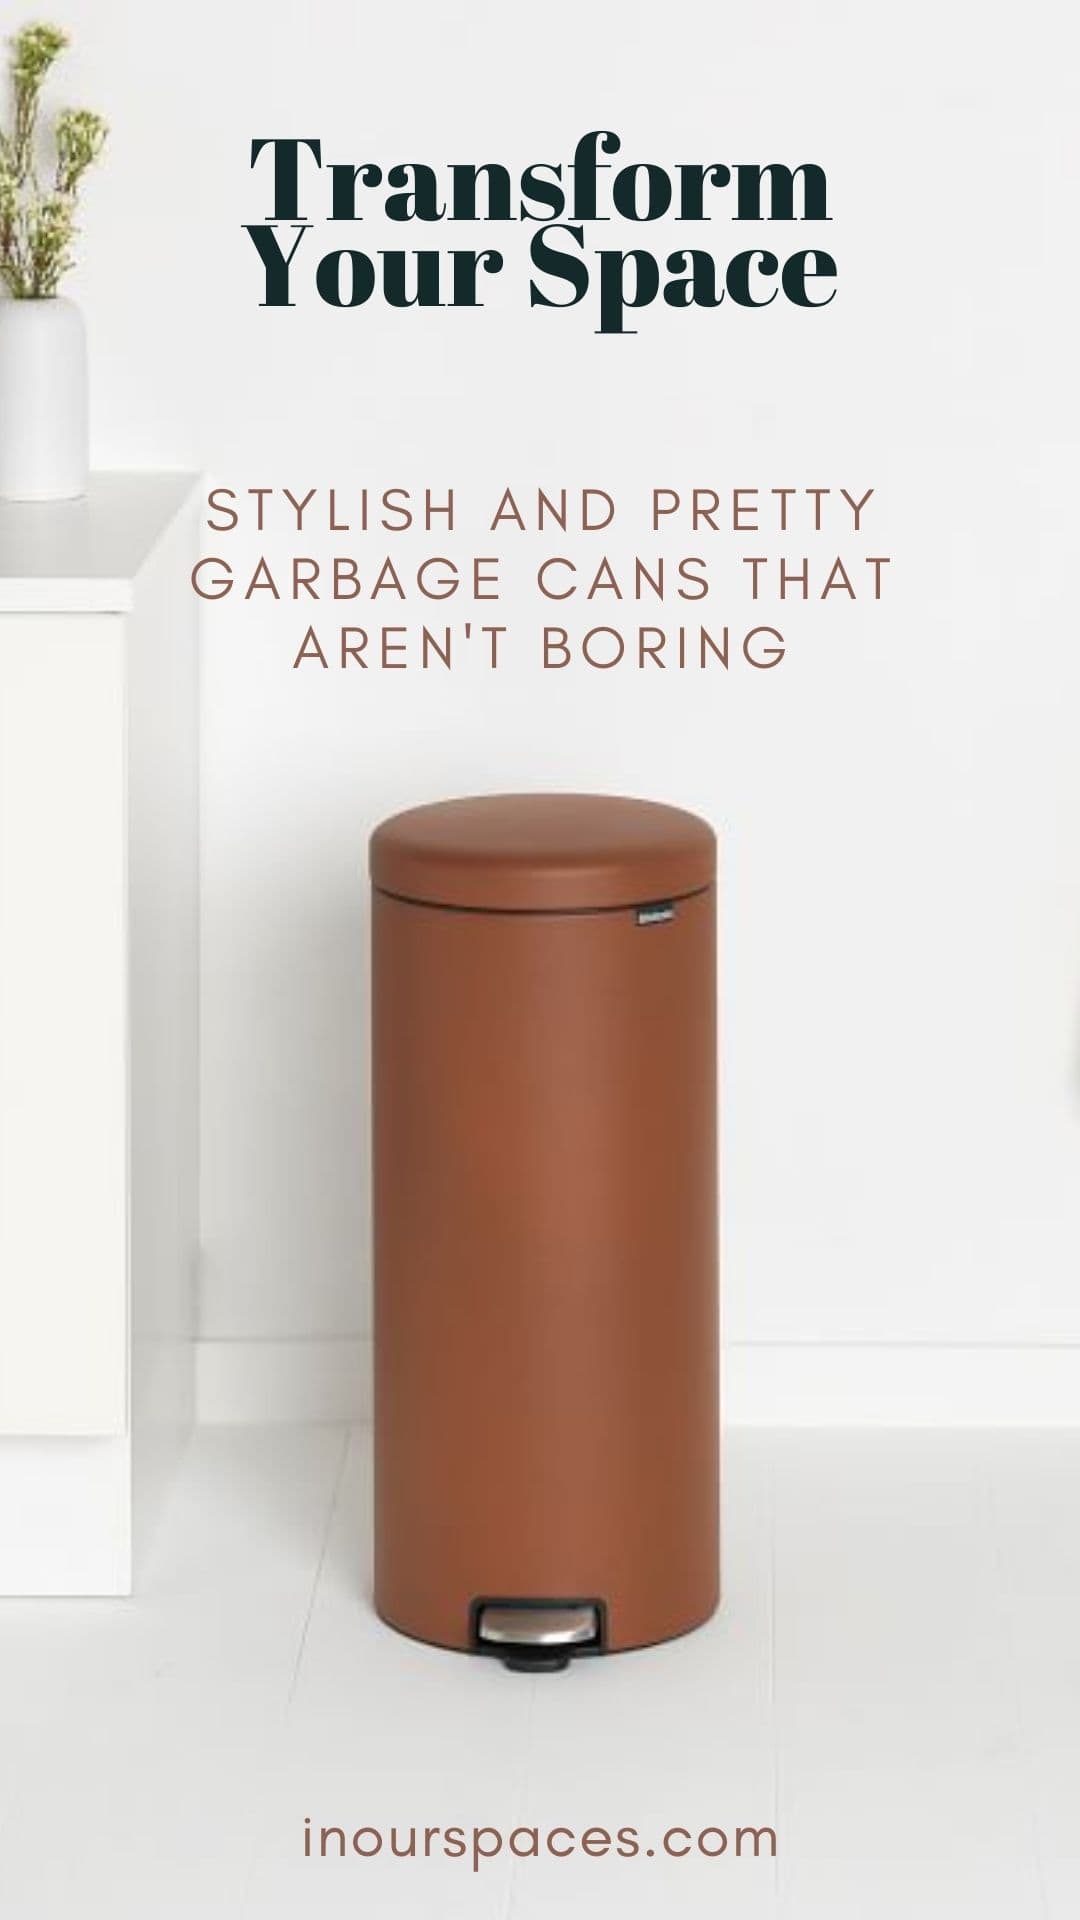 image of copper-colored cylinder trash can with text that reads transform your space, stylish and. pretty garbage cans that aren't boring